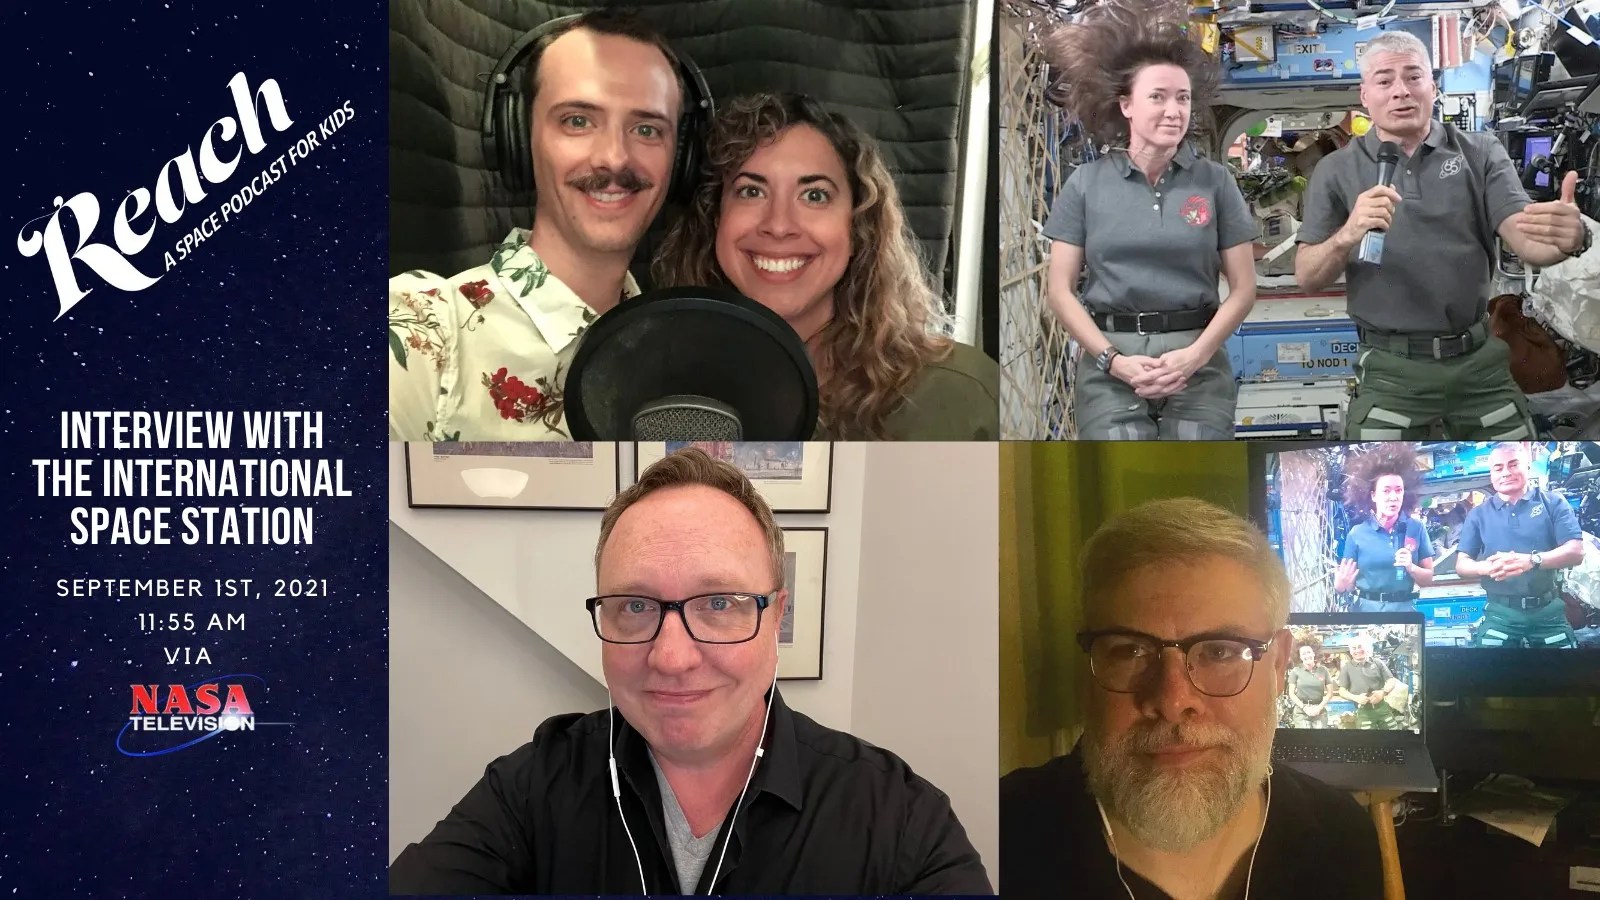 NASA Astronauts Megan McArthur and Mark Vande Hei join an episode of REACH: A Space Podcast for Kids! (Clockwise from top left corner: co-hosts Brian Holden & Meredith Stepien, NASA Astronauts Megan McArthur & Mark Vande Hei onboard the International Space Station, co-creator Sandy Marshall, and co-creator Nate DuFort).